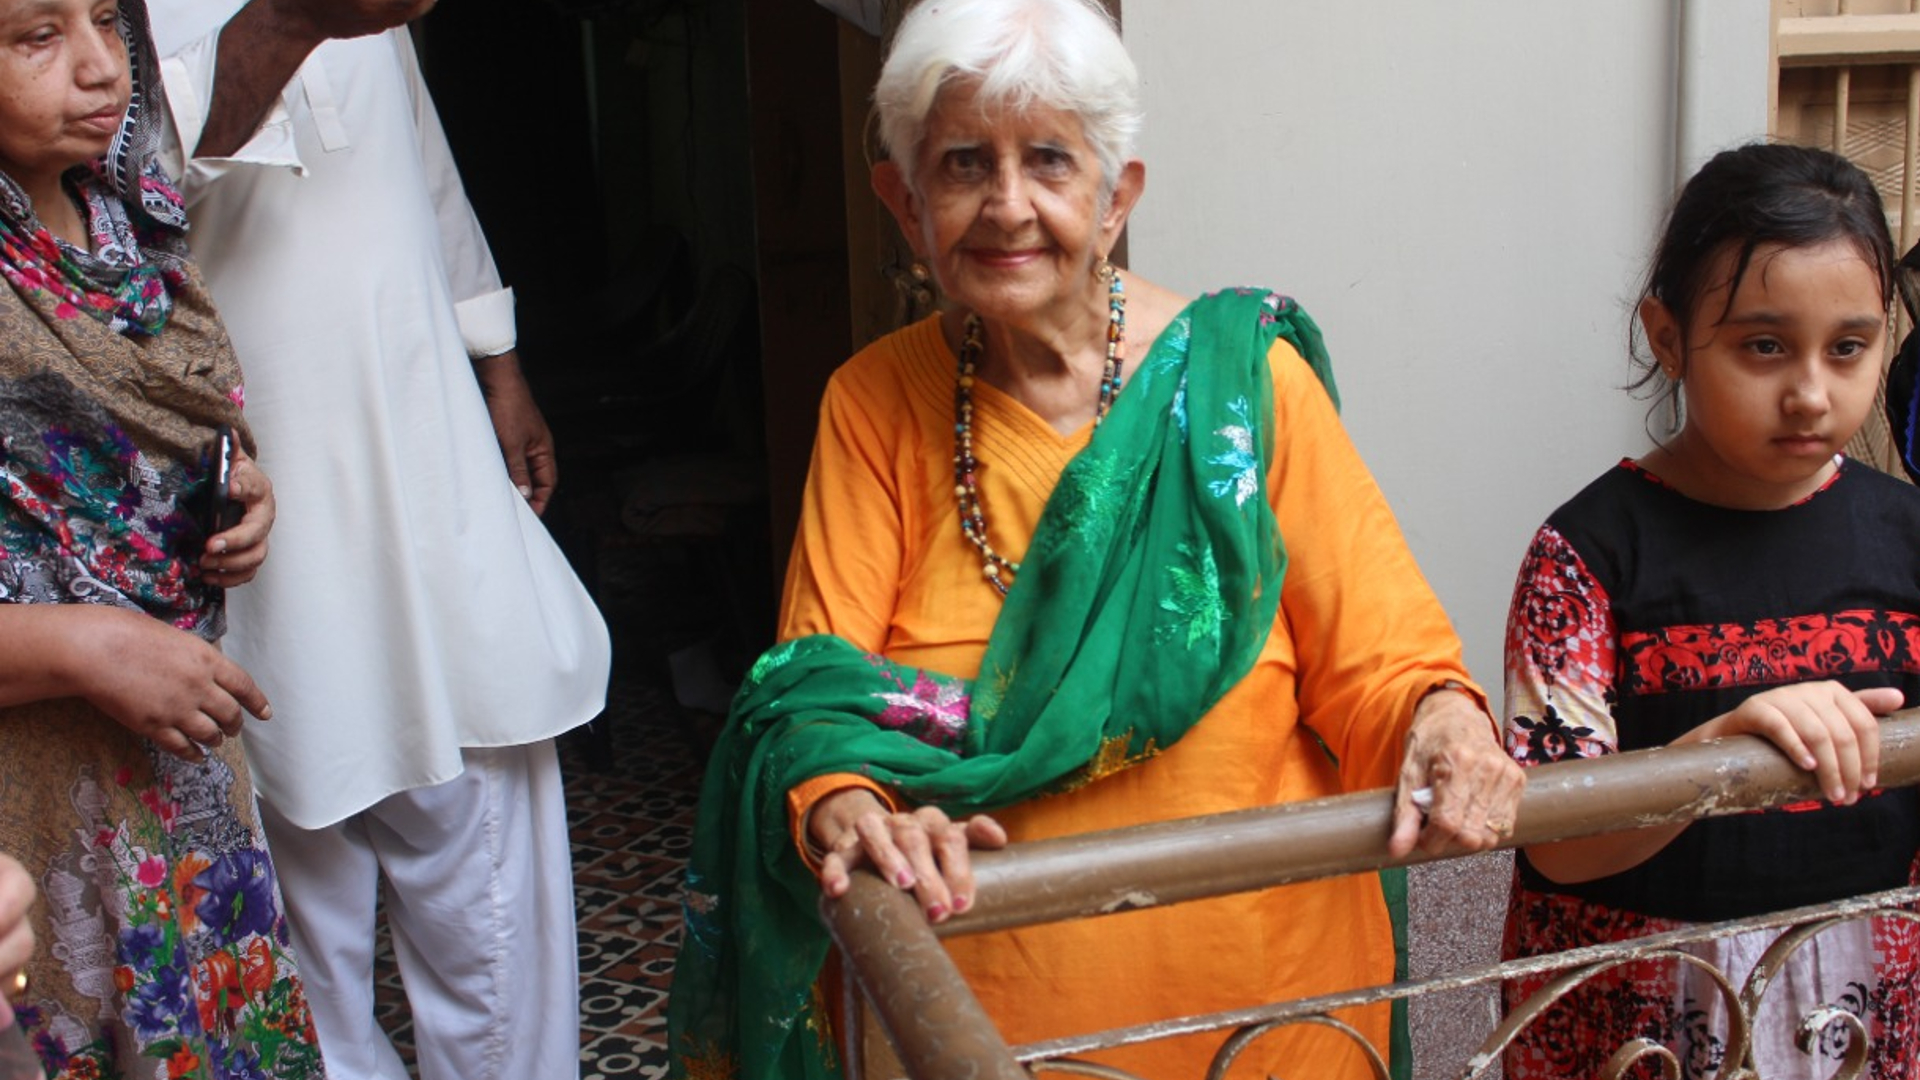 90-year-old Indian Woman 